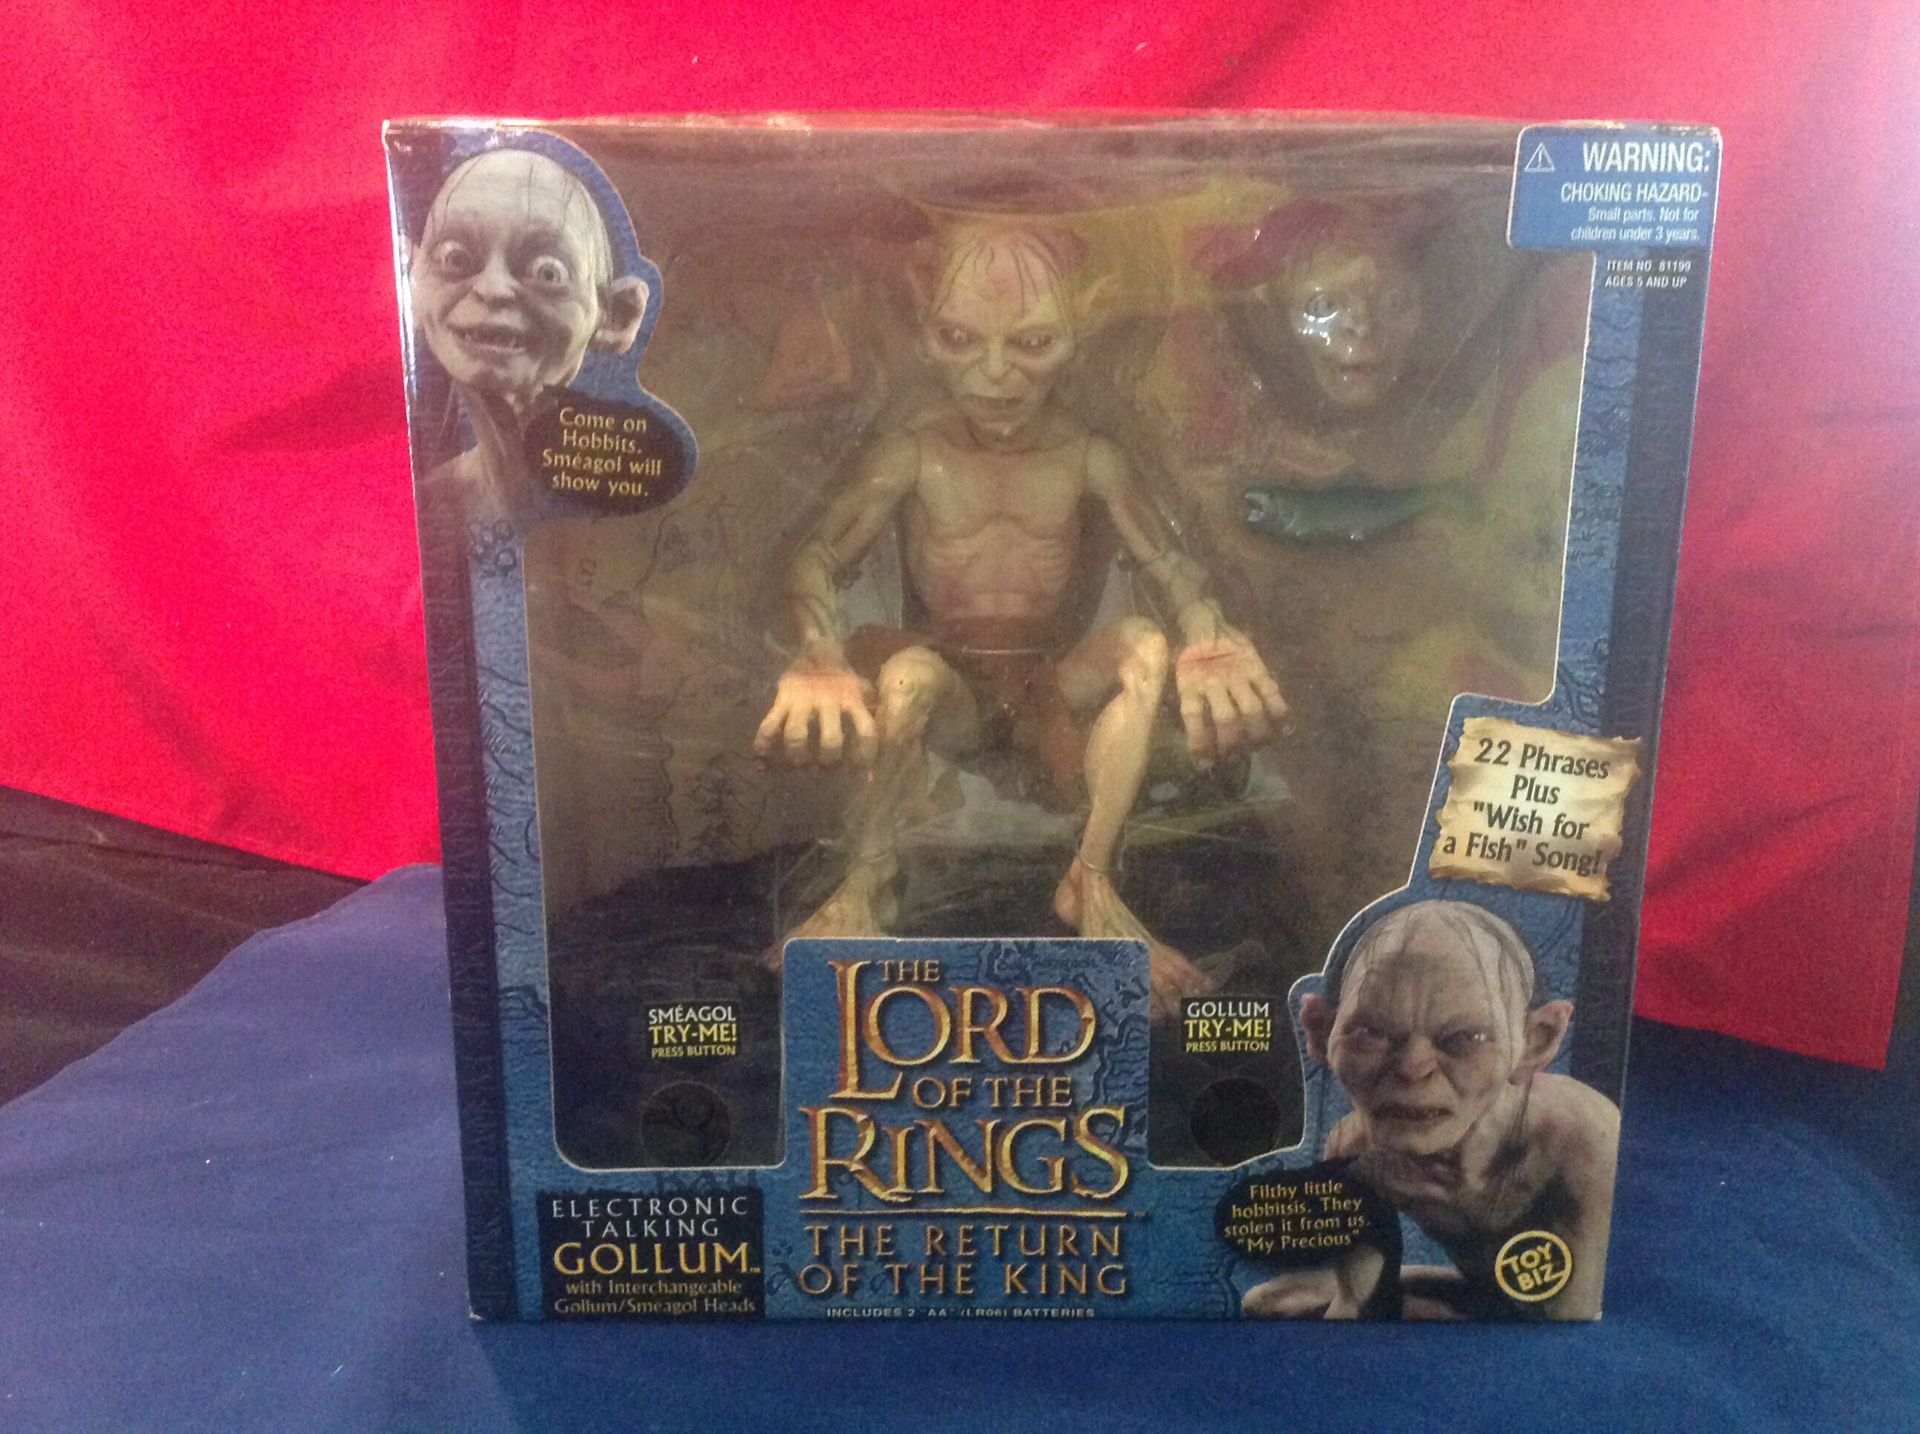 Lord Of The Rings Vintage Electronic Talking Gollum, Smeagol Lg. Figure Return Of The King Toy Biz New Boxed